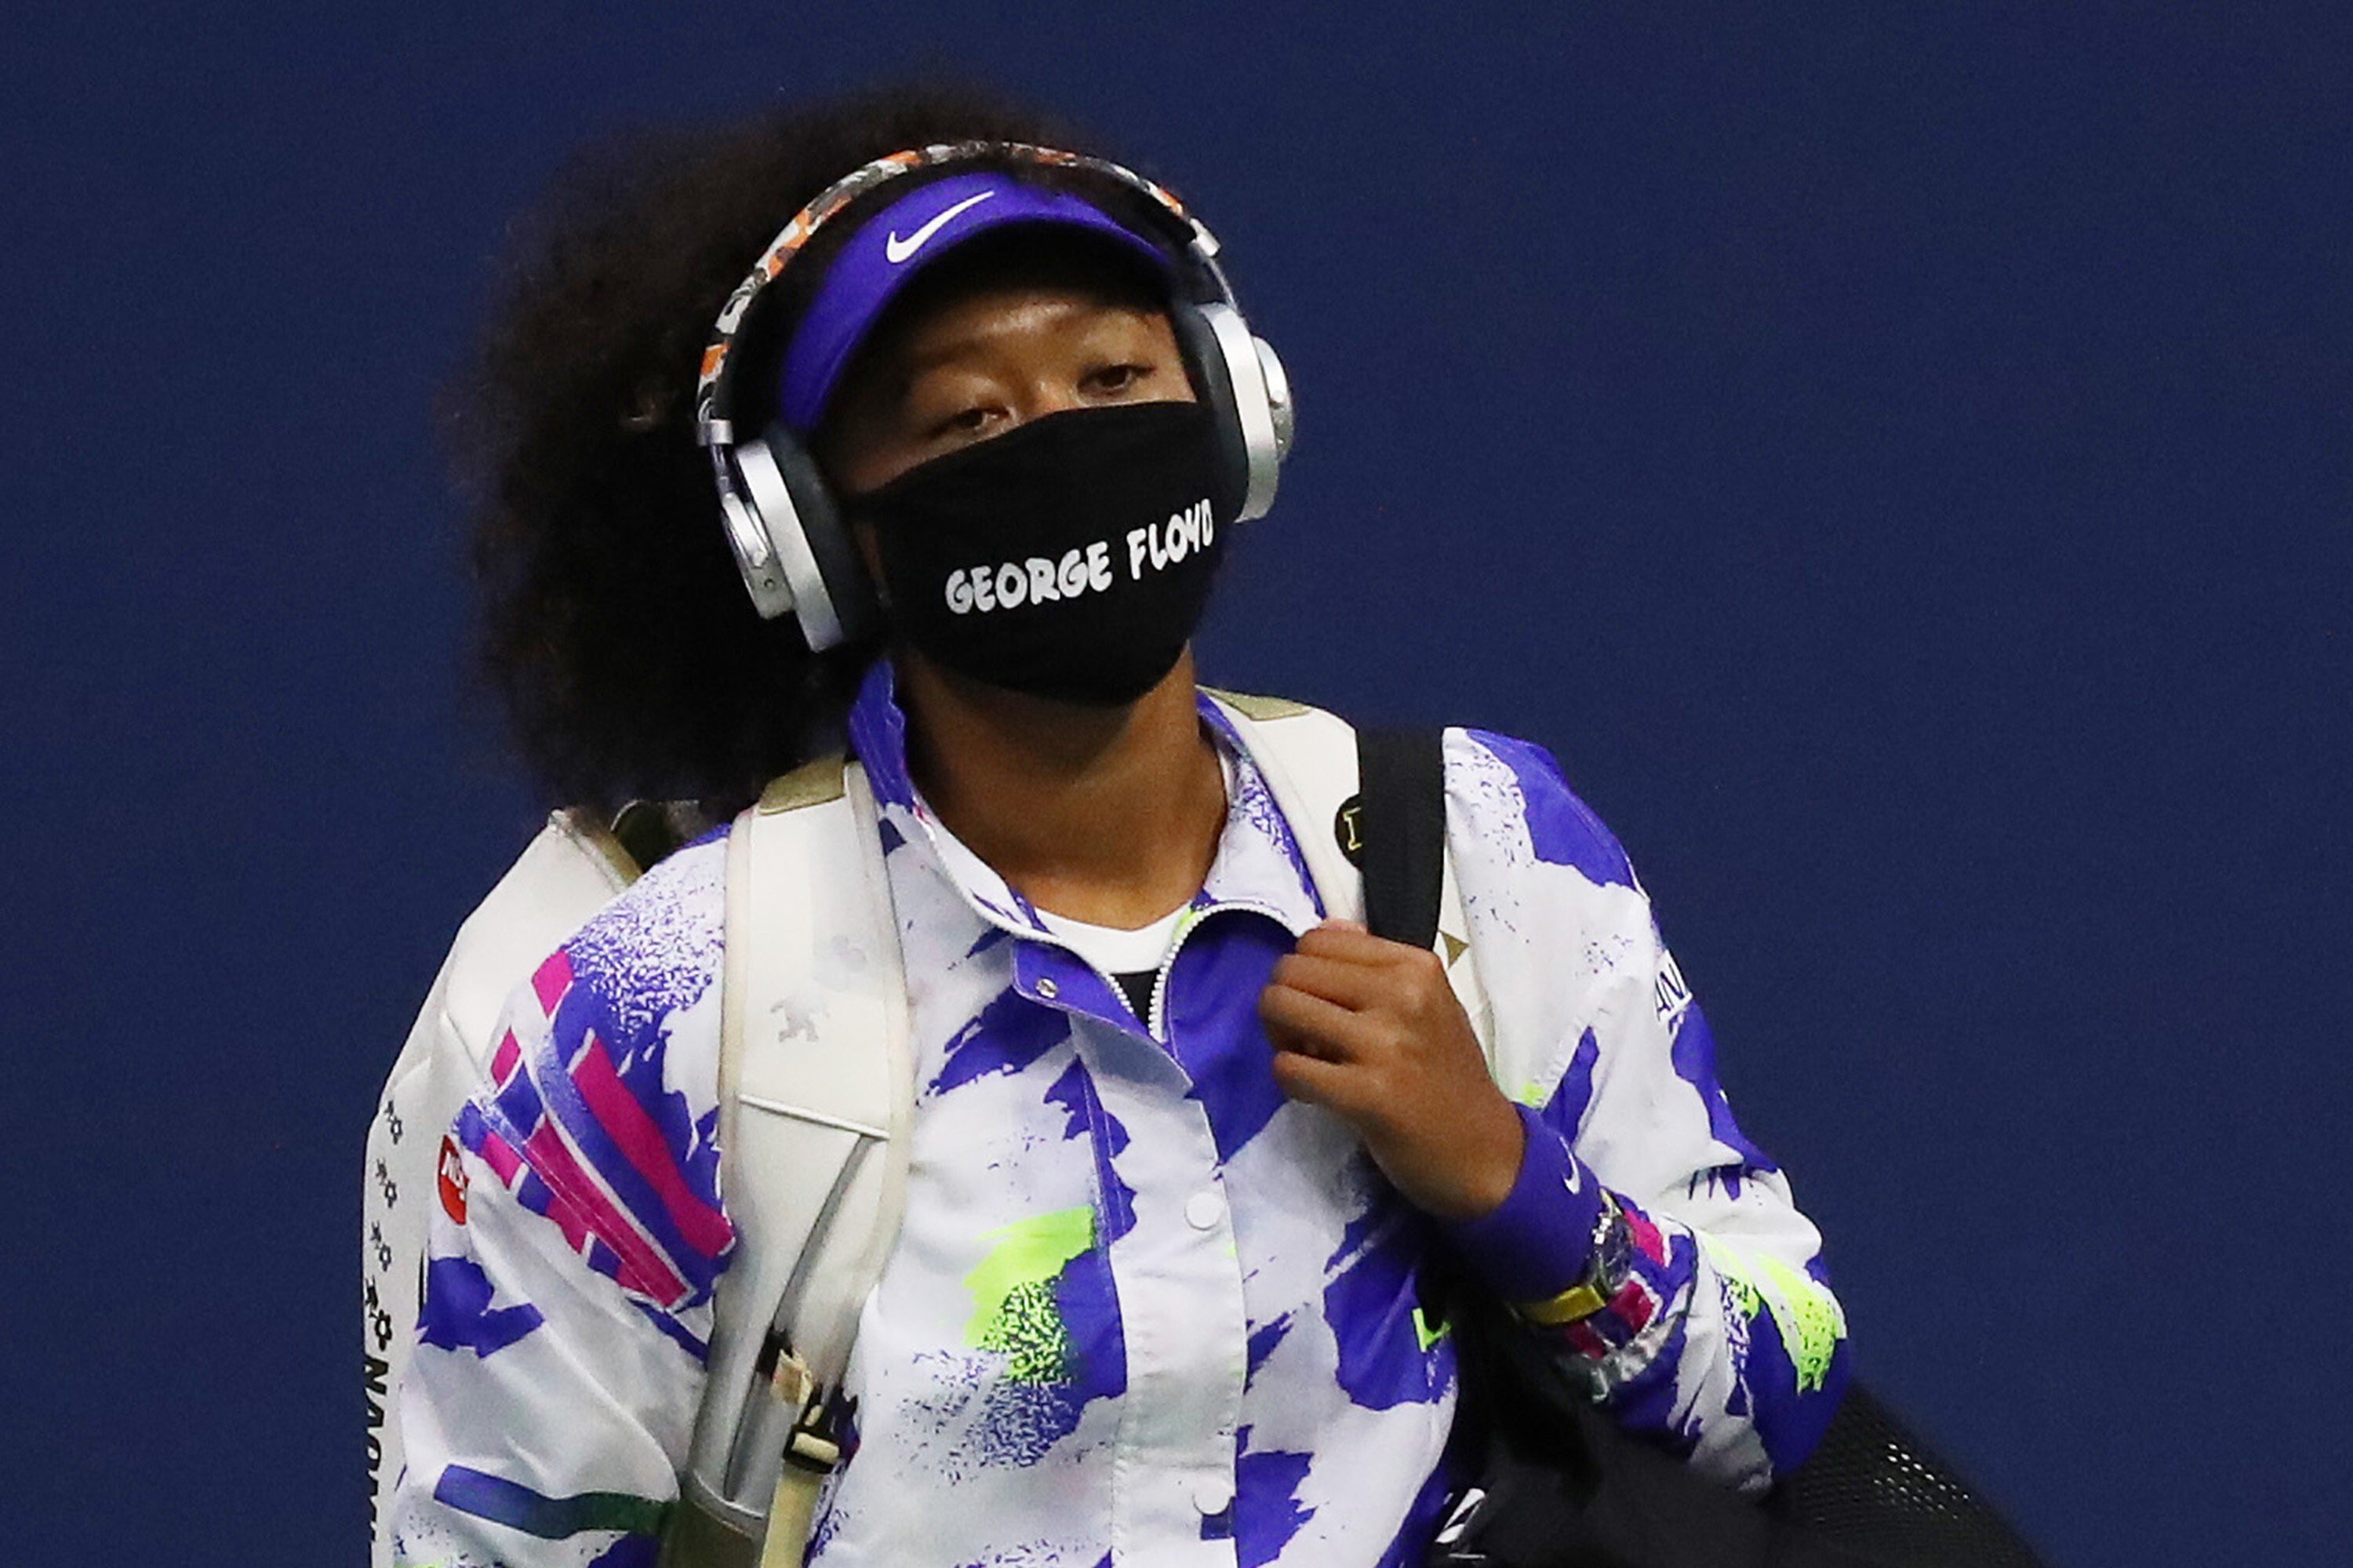 Naomi Osaka of Japan walks onto court at the 2020 US Open wearing a mask with the name of George Floyd on it. Photo: TNS